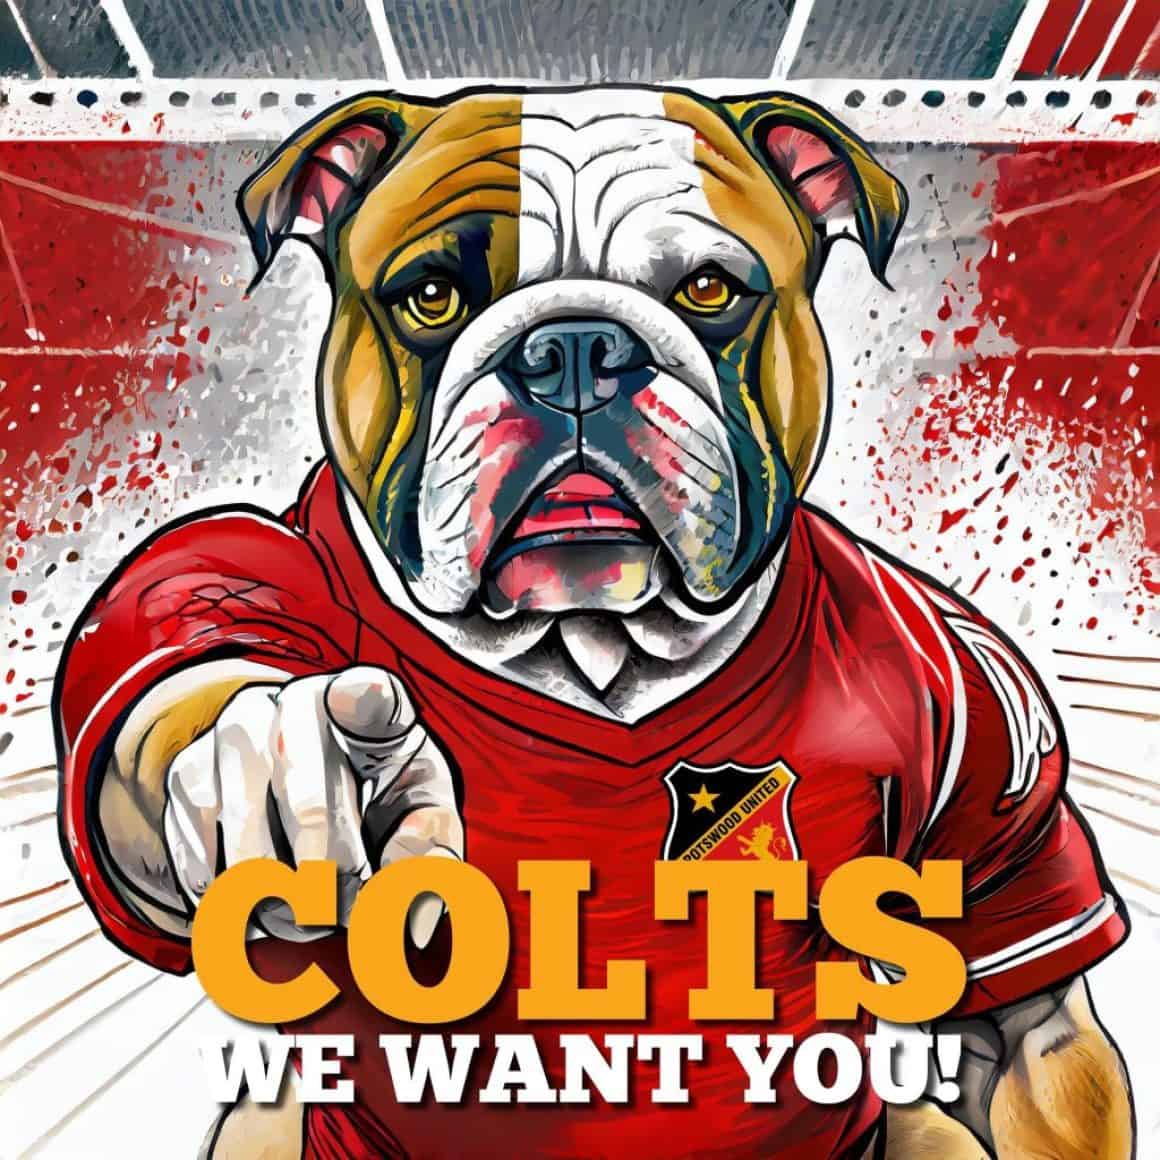 Colts – we want you!